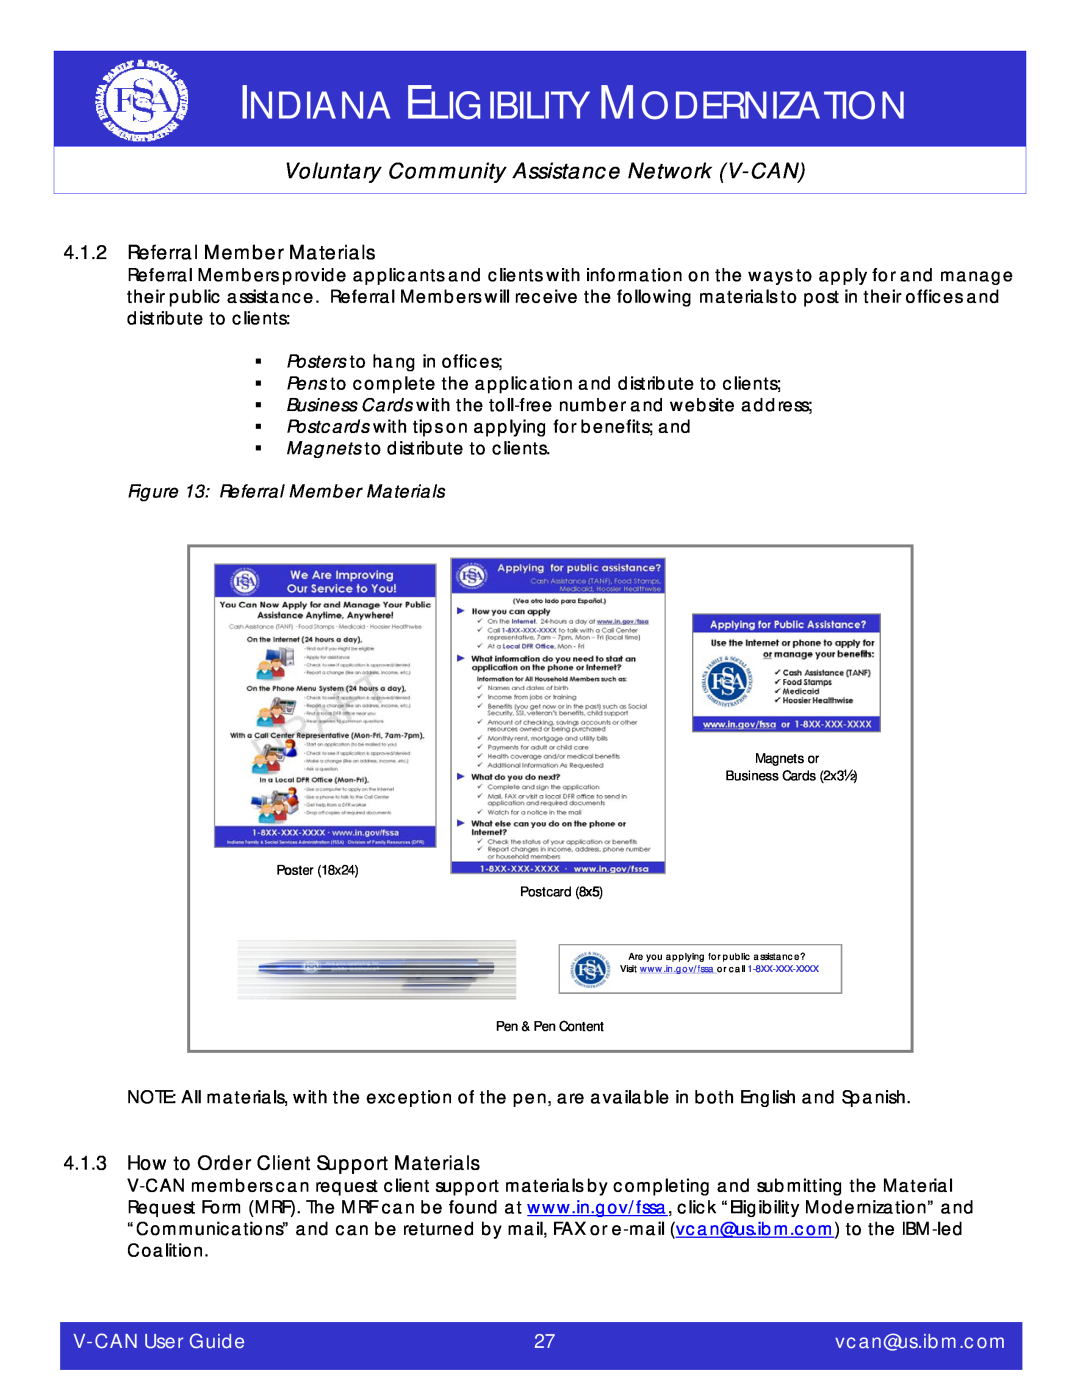 IBM V-CAN manual Referral Member Materials, How to Order Client Support Materials, Indiana Eligibility Modernization 